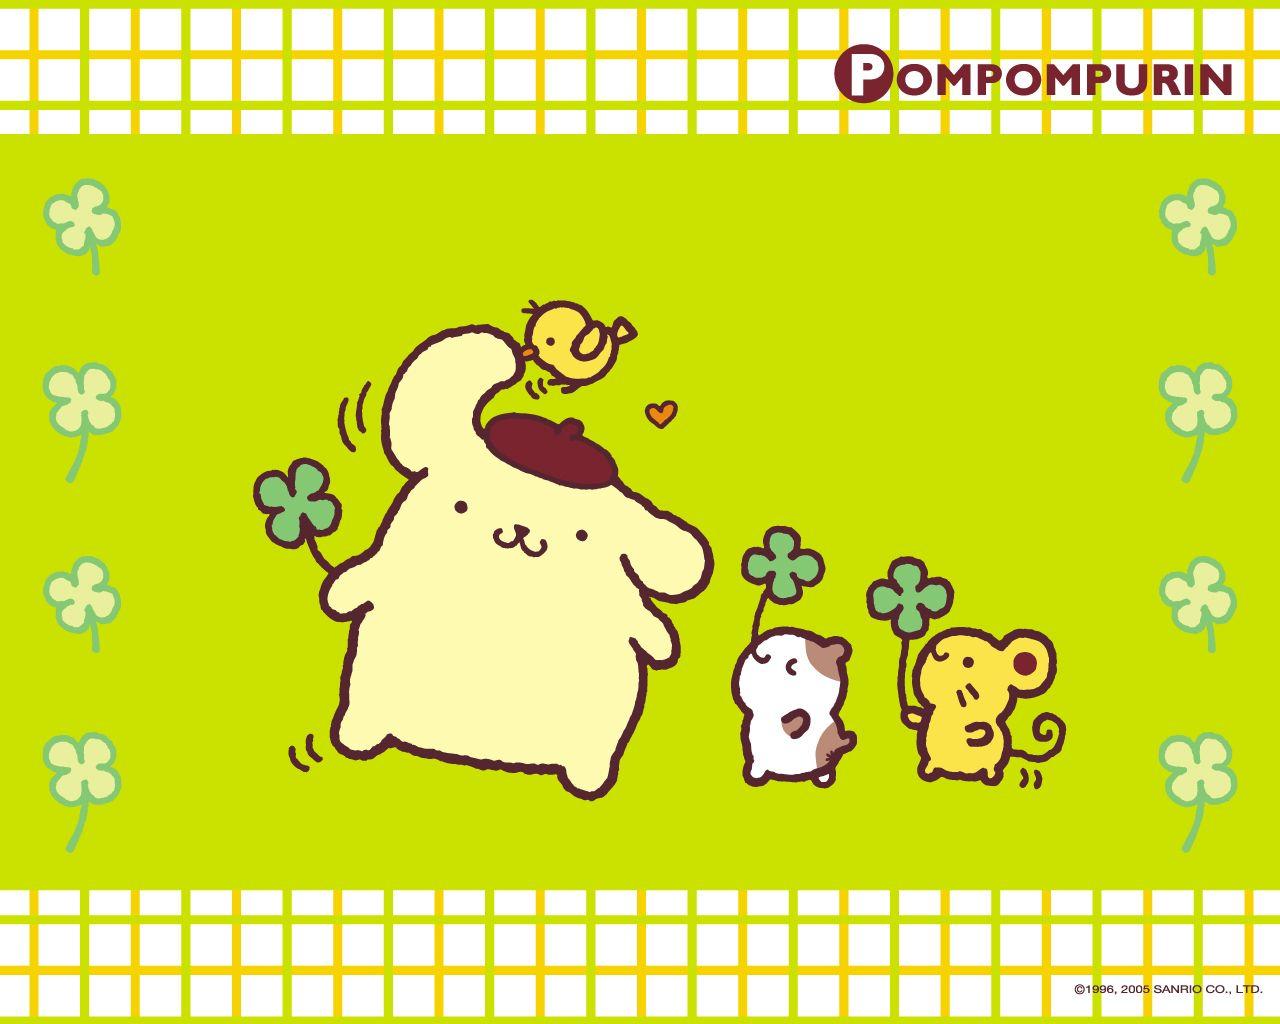 Background Pompompurin Wallpaper Discover more Character Cute Japanese  Pompompurin Sanrio wall in 2023  Sanrio wallpaper Cute wallpaper  backgrounds Kawaii wallpaper